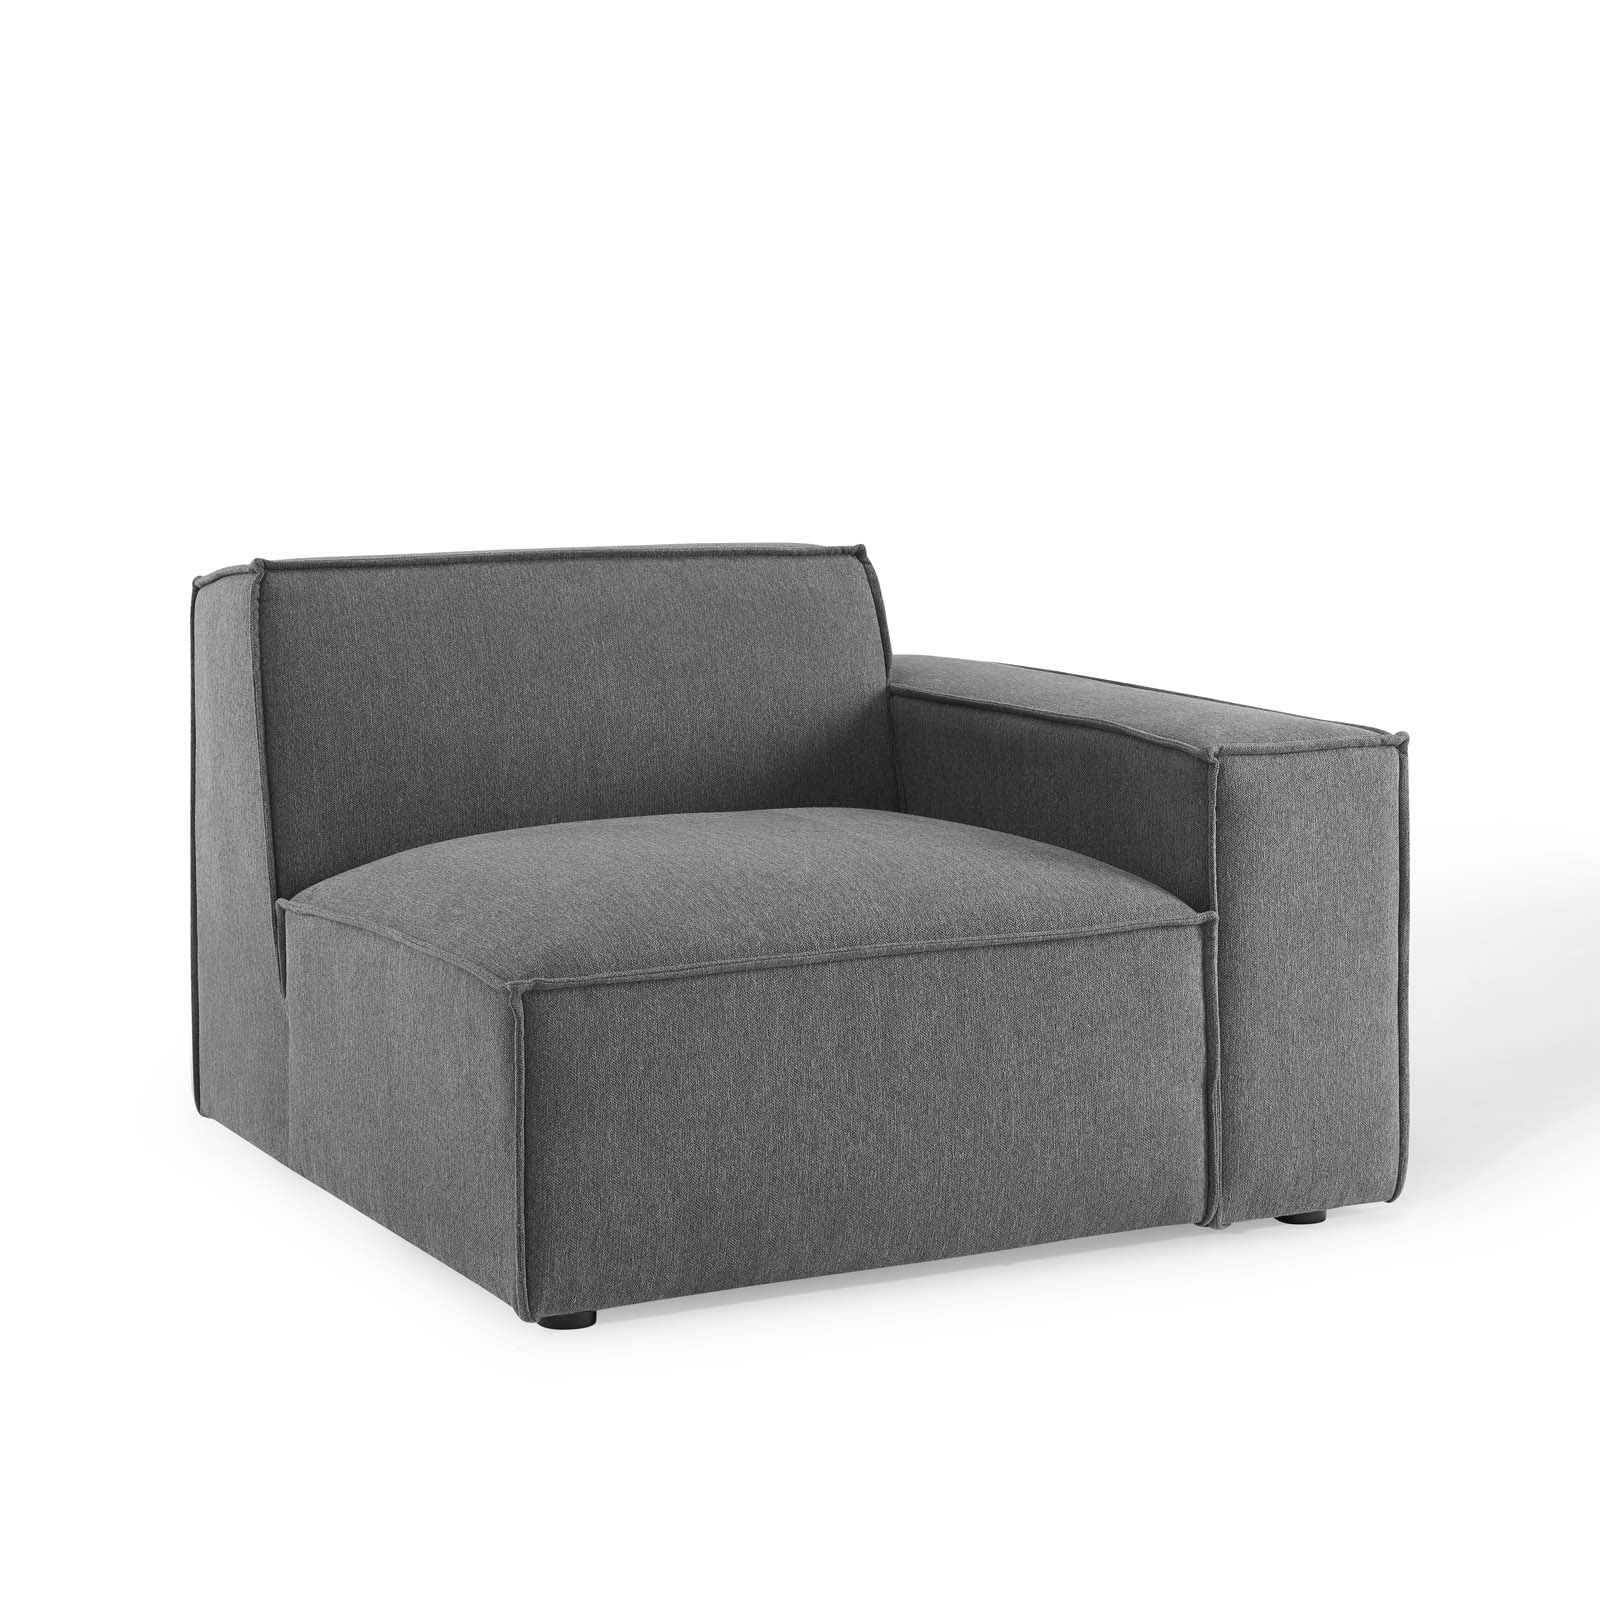 Modway Sofas & Couches - Restore 3-Piece Sofa Charcoal